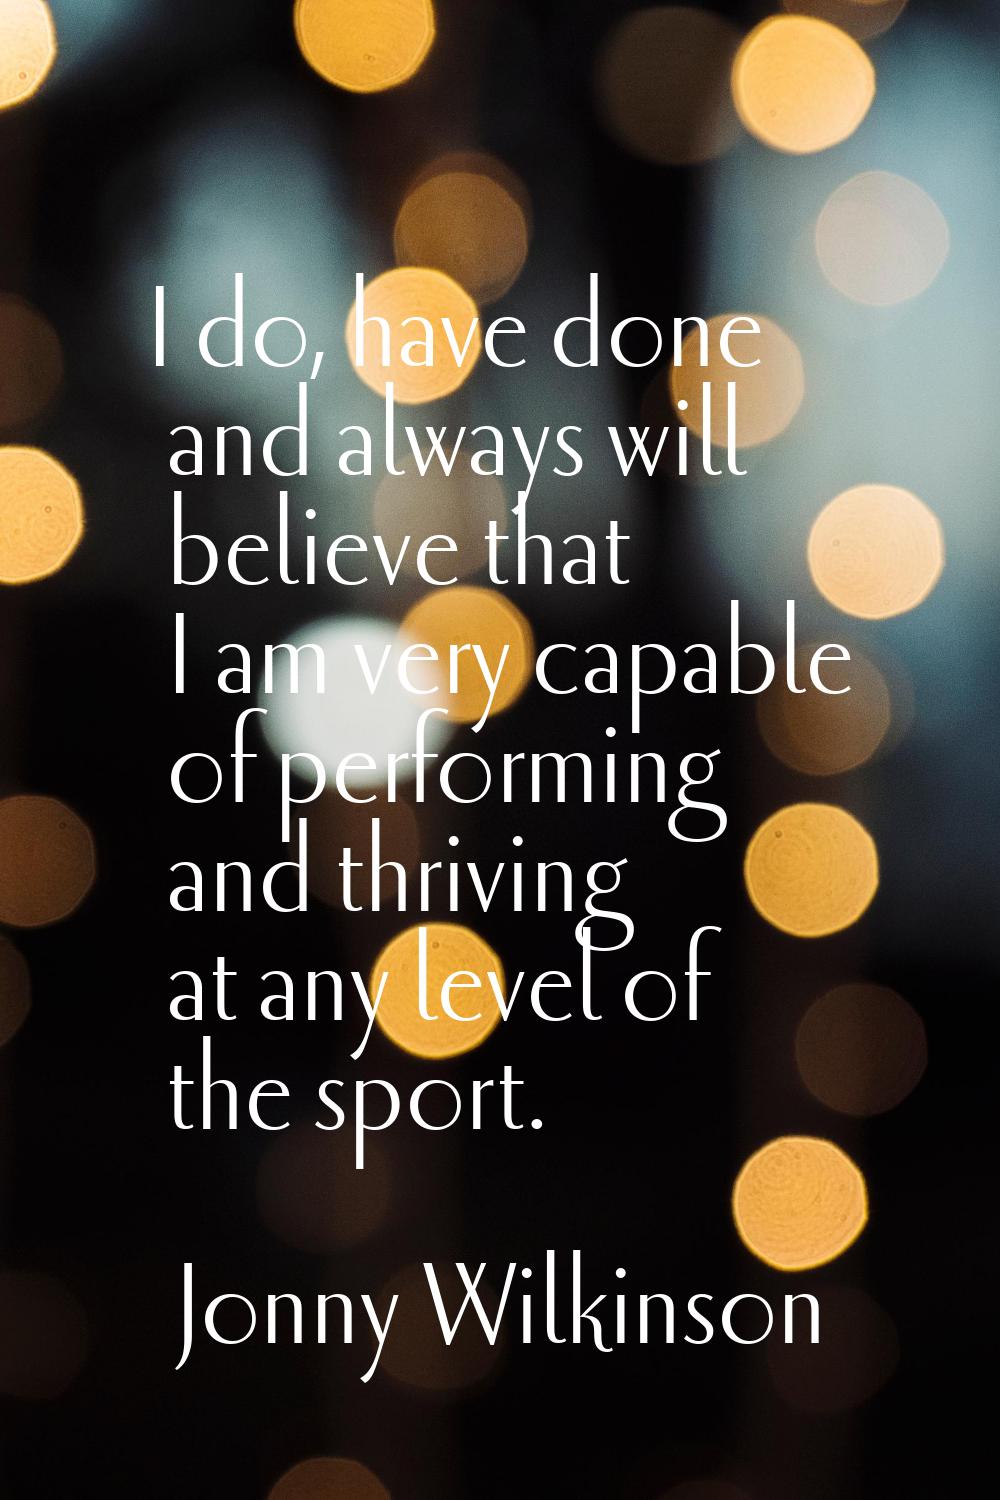 I do, have done and always will believe that I am very capable of performing and thriving at any le